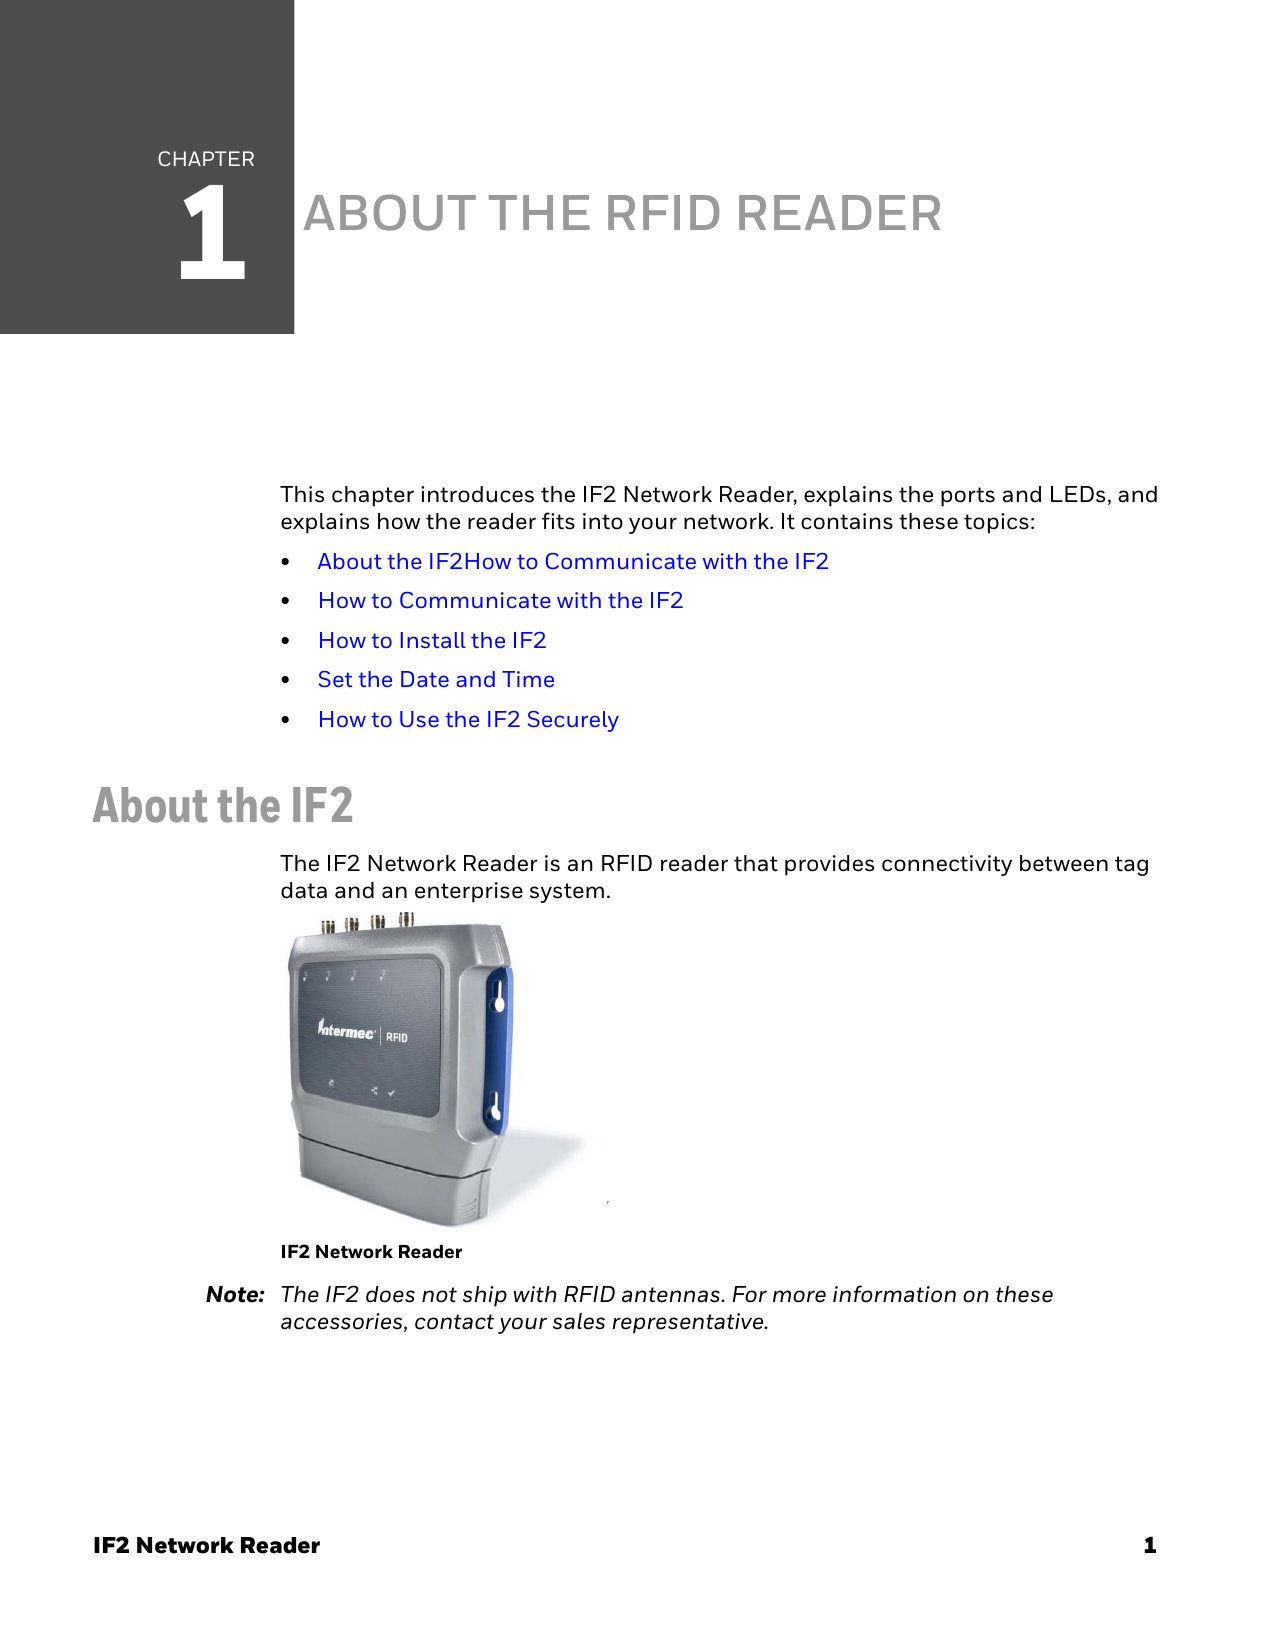 CHAPTER1IF2 Network Reader 1ABOUT THE RFID READERThis chapter introduces the IF2 Network Reader, explains the ports and LEDs, and explains how the reader fits into your network. It contains these topics:•About the IF2How to Communicate with the IF2•How to Communicate with the IF2•How to Install the IF2•Set the Date and Time•How to Use the IF2 SecurelyAbout the IF2The IF2 Network Reader is an RFID reader that provides connectivity between tag data and an enterprise system.7IF2 Network ReaderNote: The IF2 does not ship with RFID antennas. For more information on these accessories, contact your sales representative.